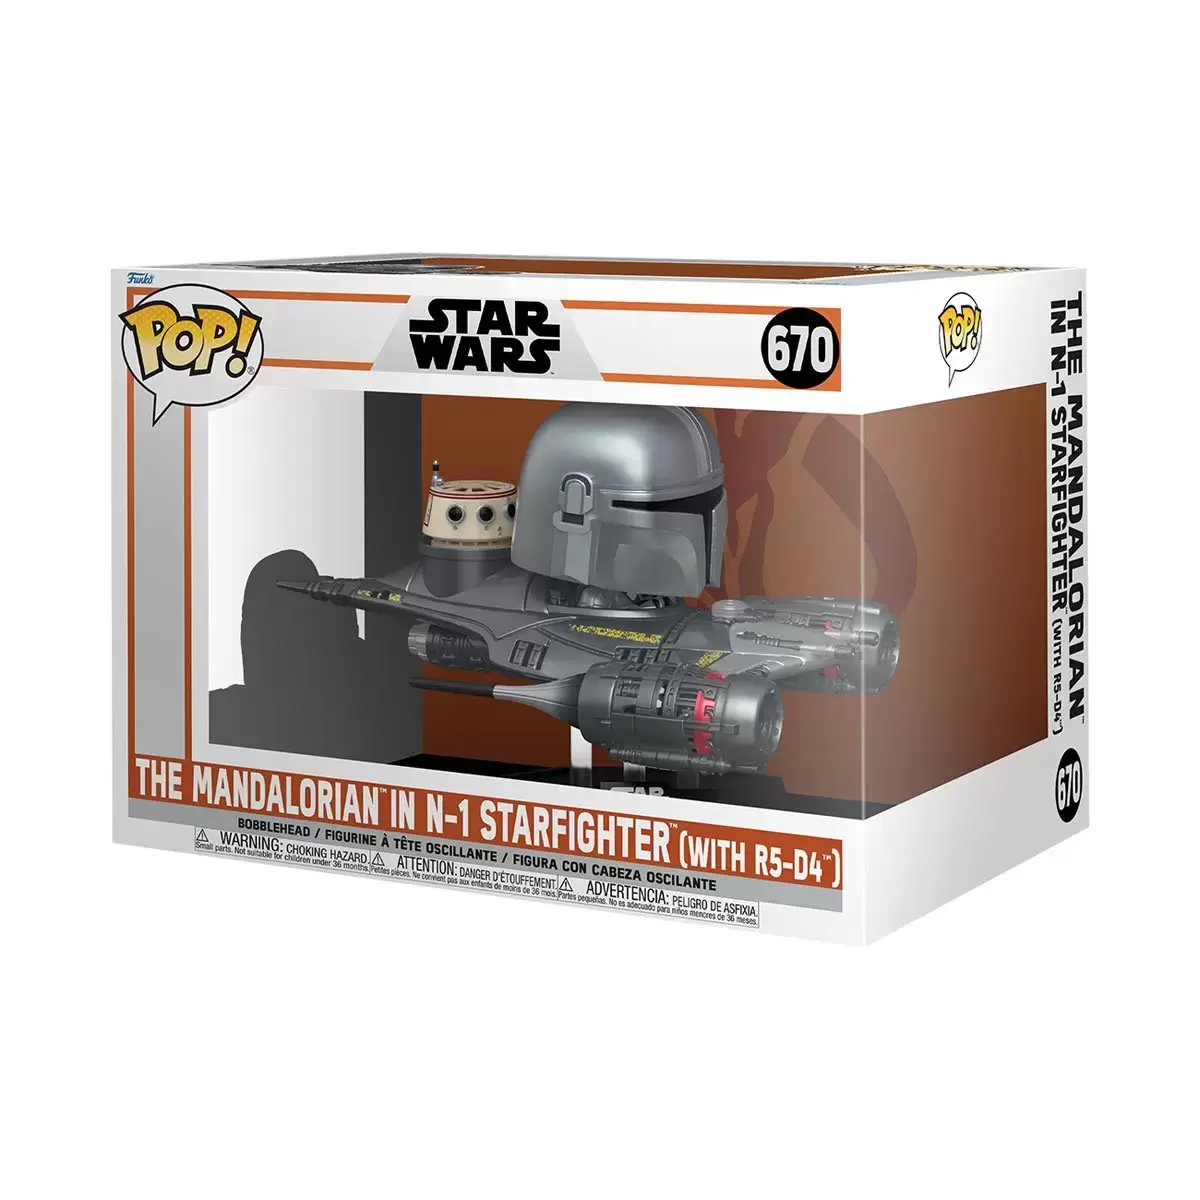 POP! Rides - The Mandalorian - The Mandalorian In N-1 Starfighter With R5-D4